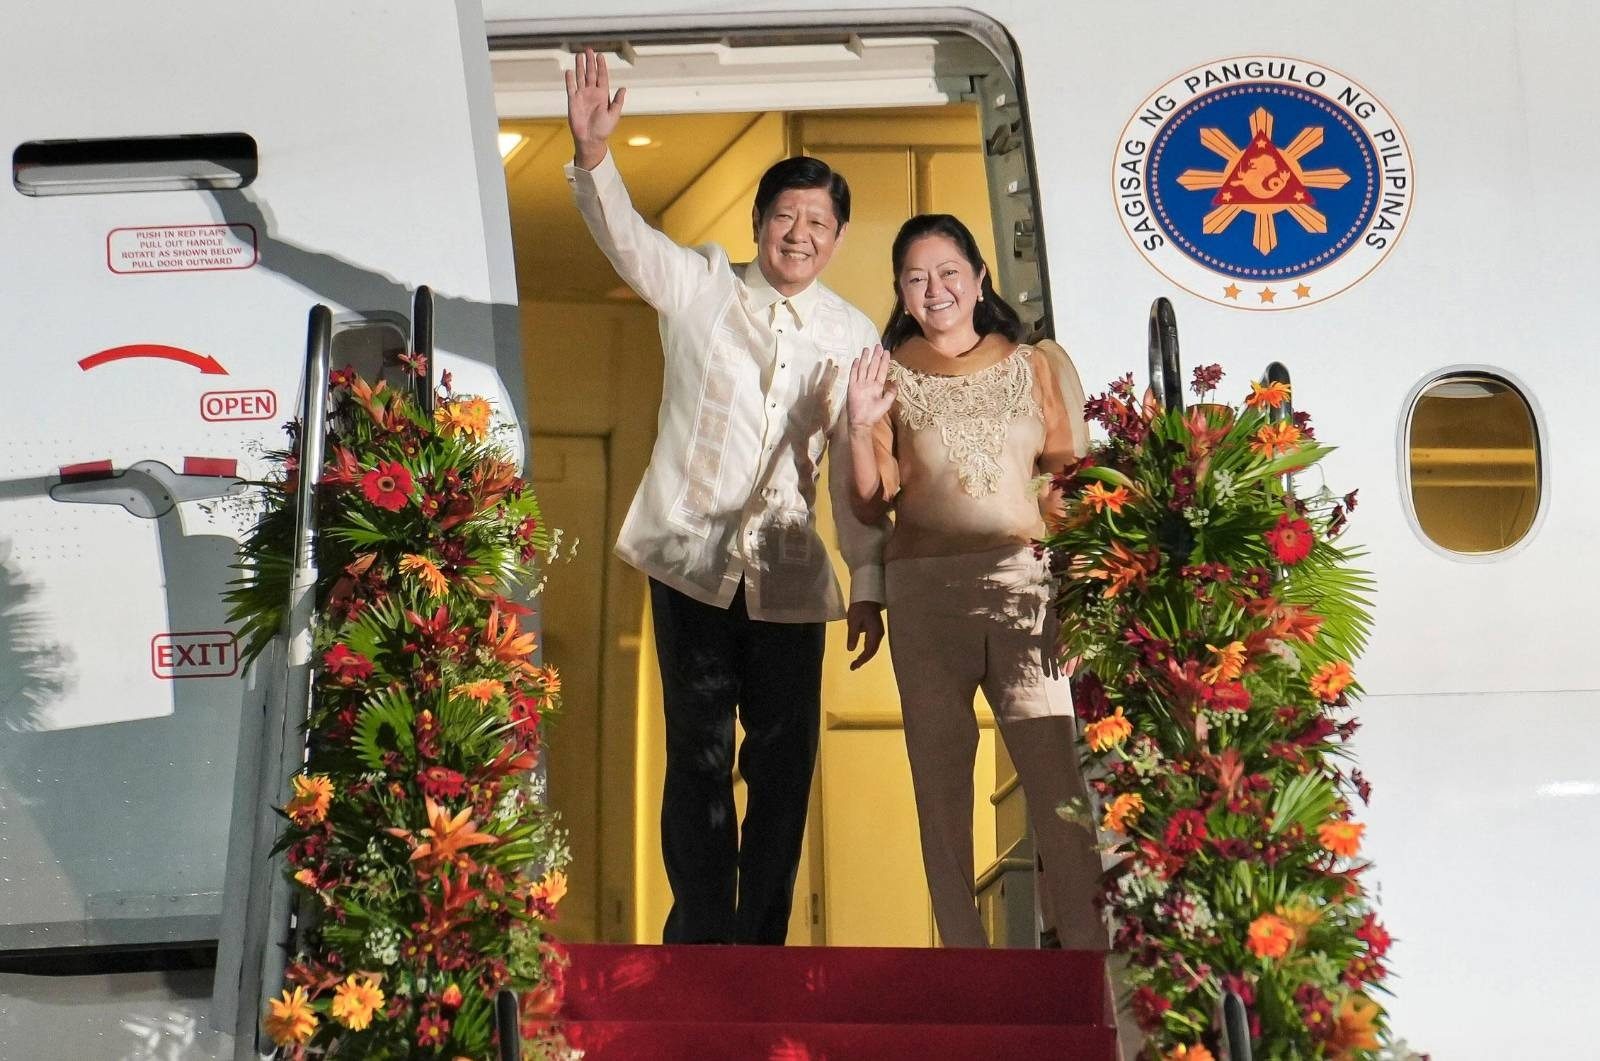 In symbolic return to Hawaii, Marcos says he just wants to see ‘old friends’